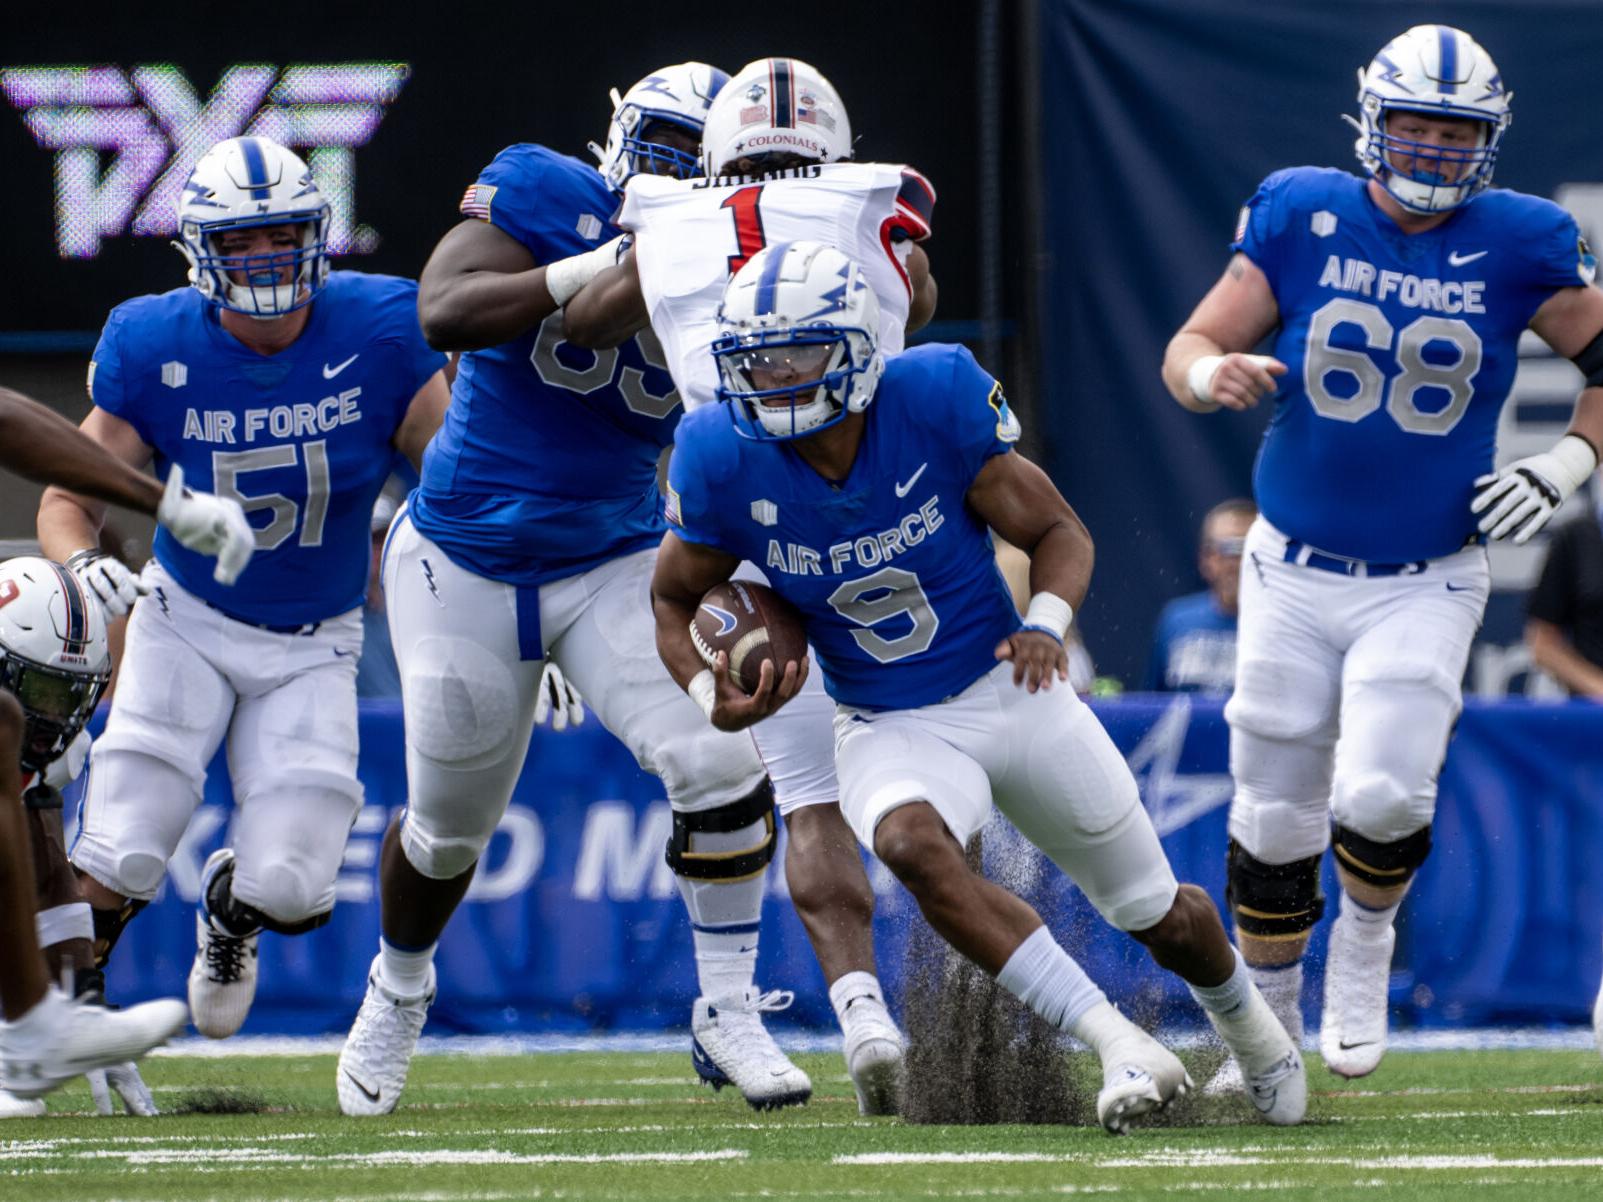 How to watch Air Force football at Sam Houston State on Saturday